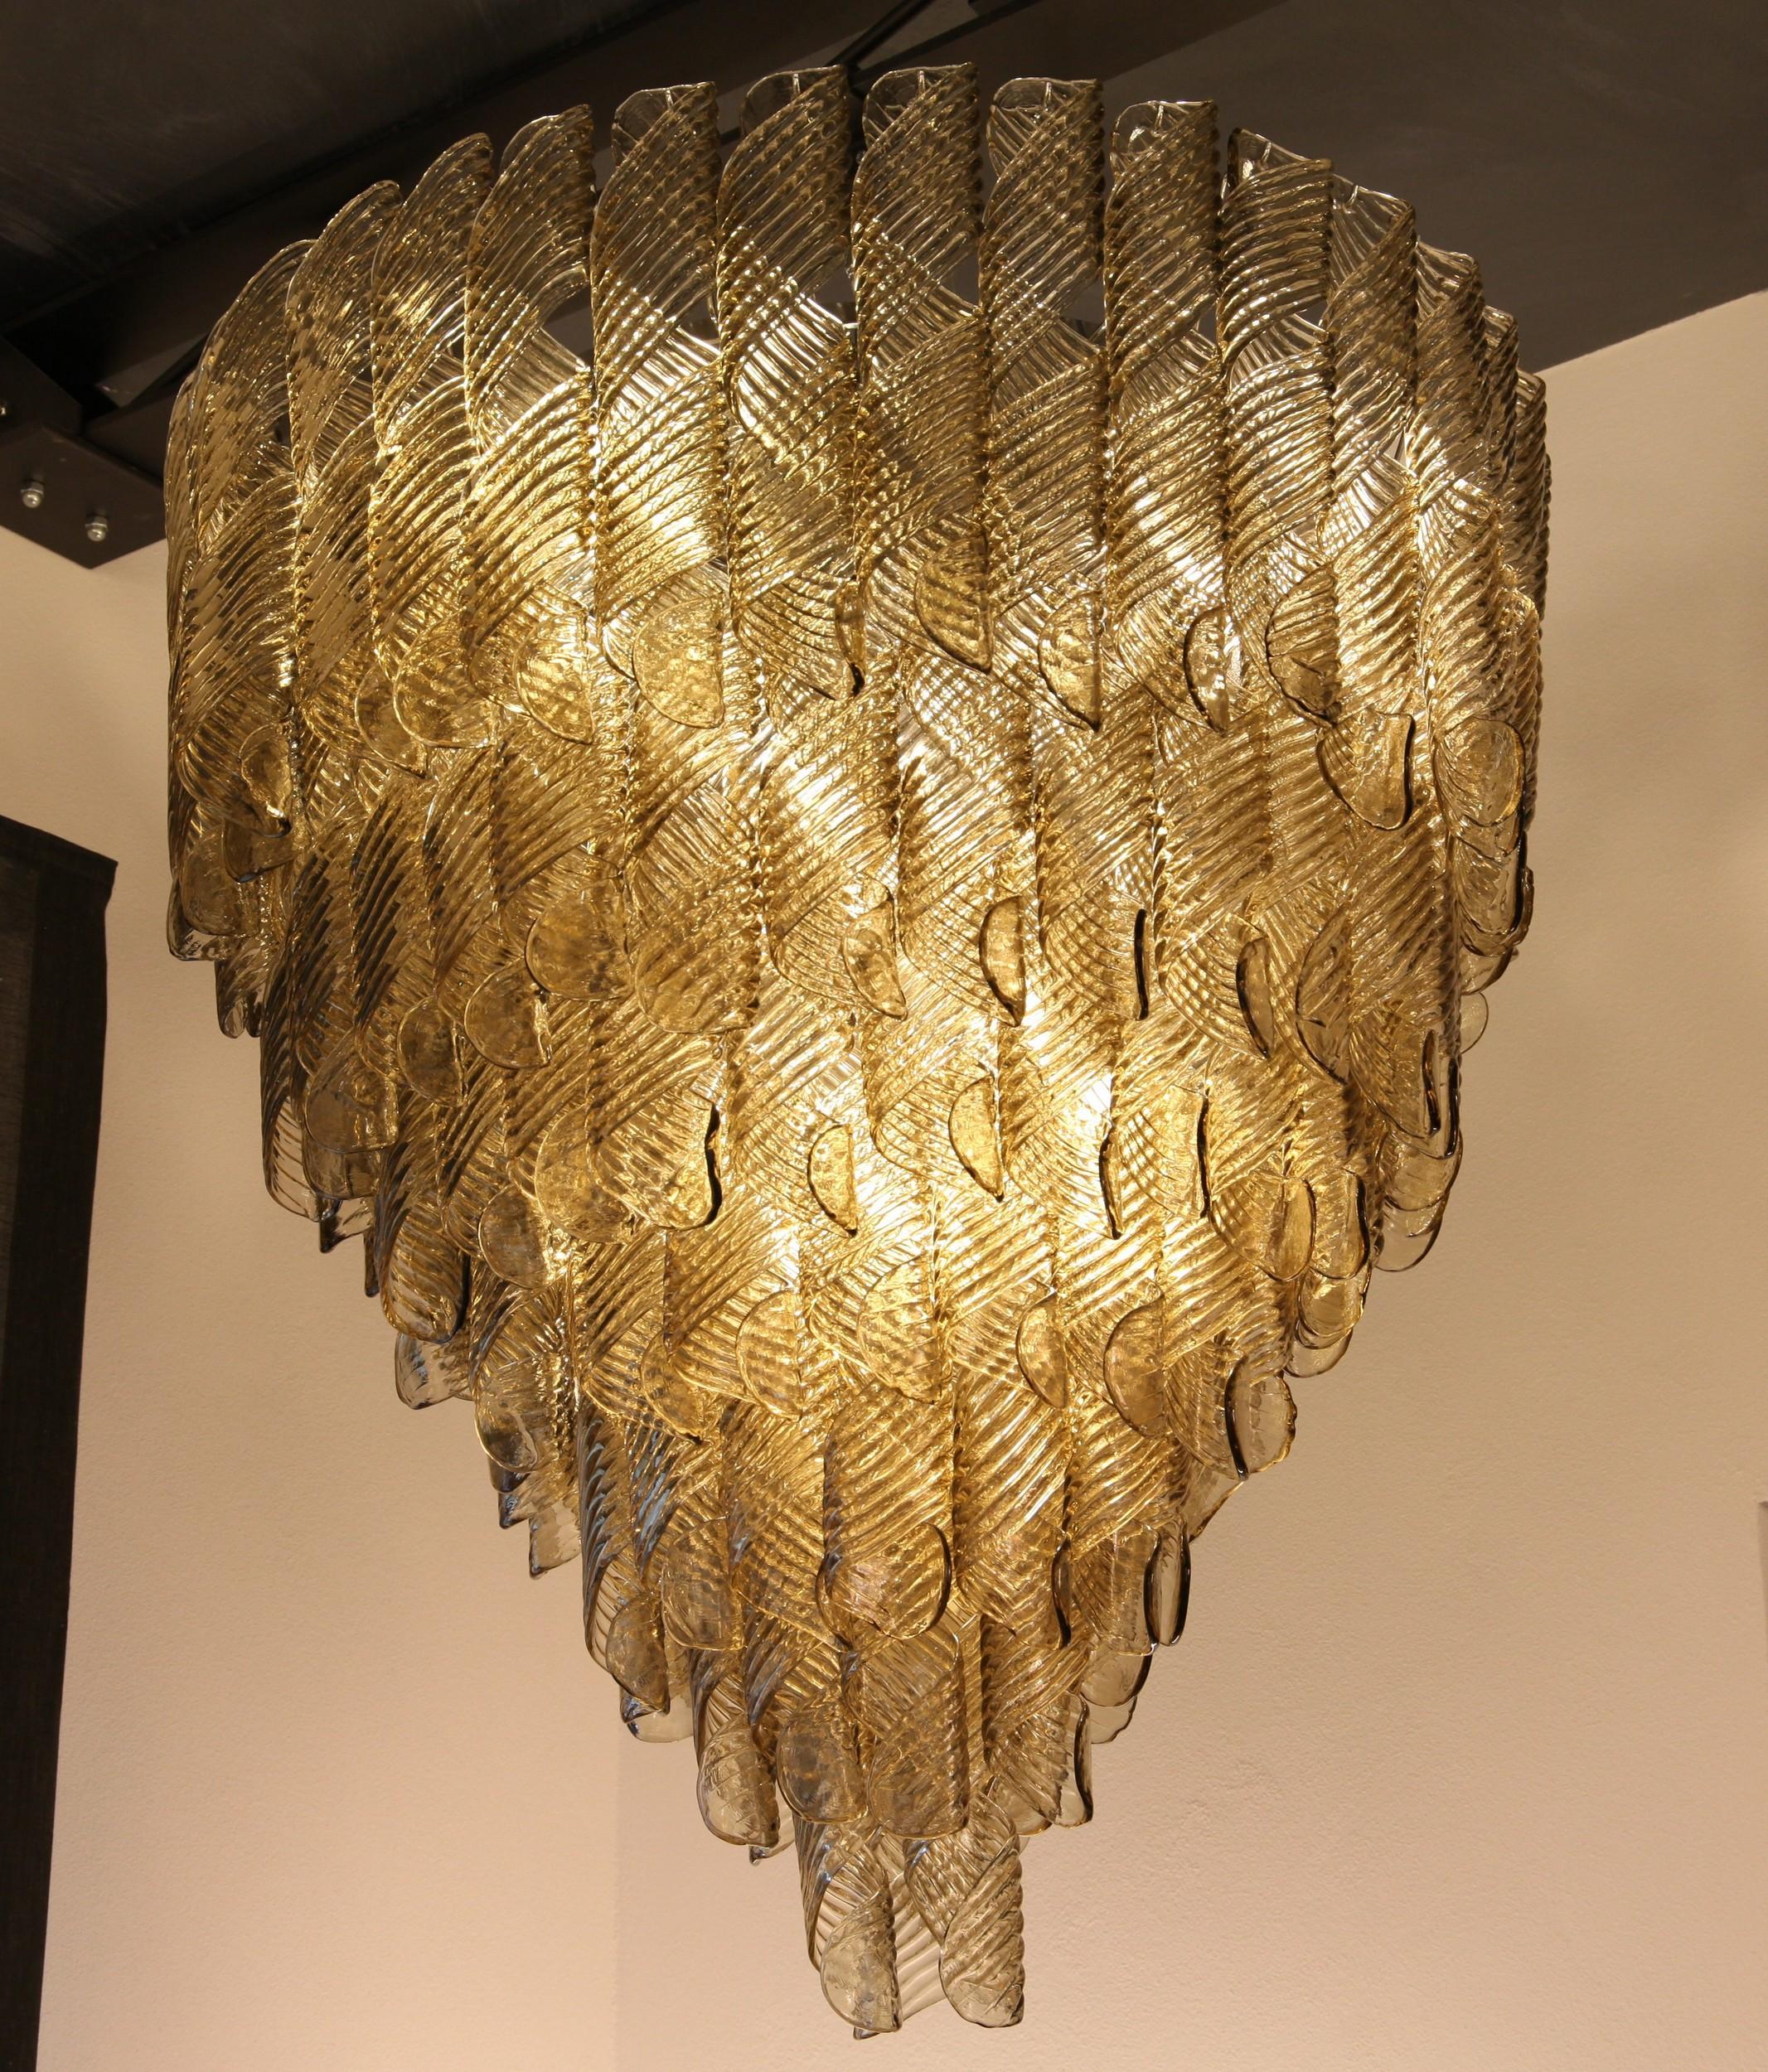 Monumental Chandelier, Murano Fume Glass in Spiral Ribbed Elements, 7 Tiers 4